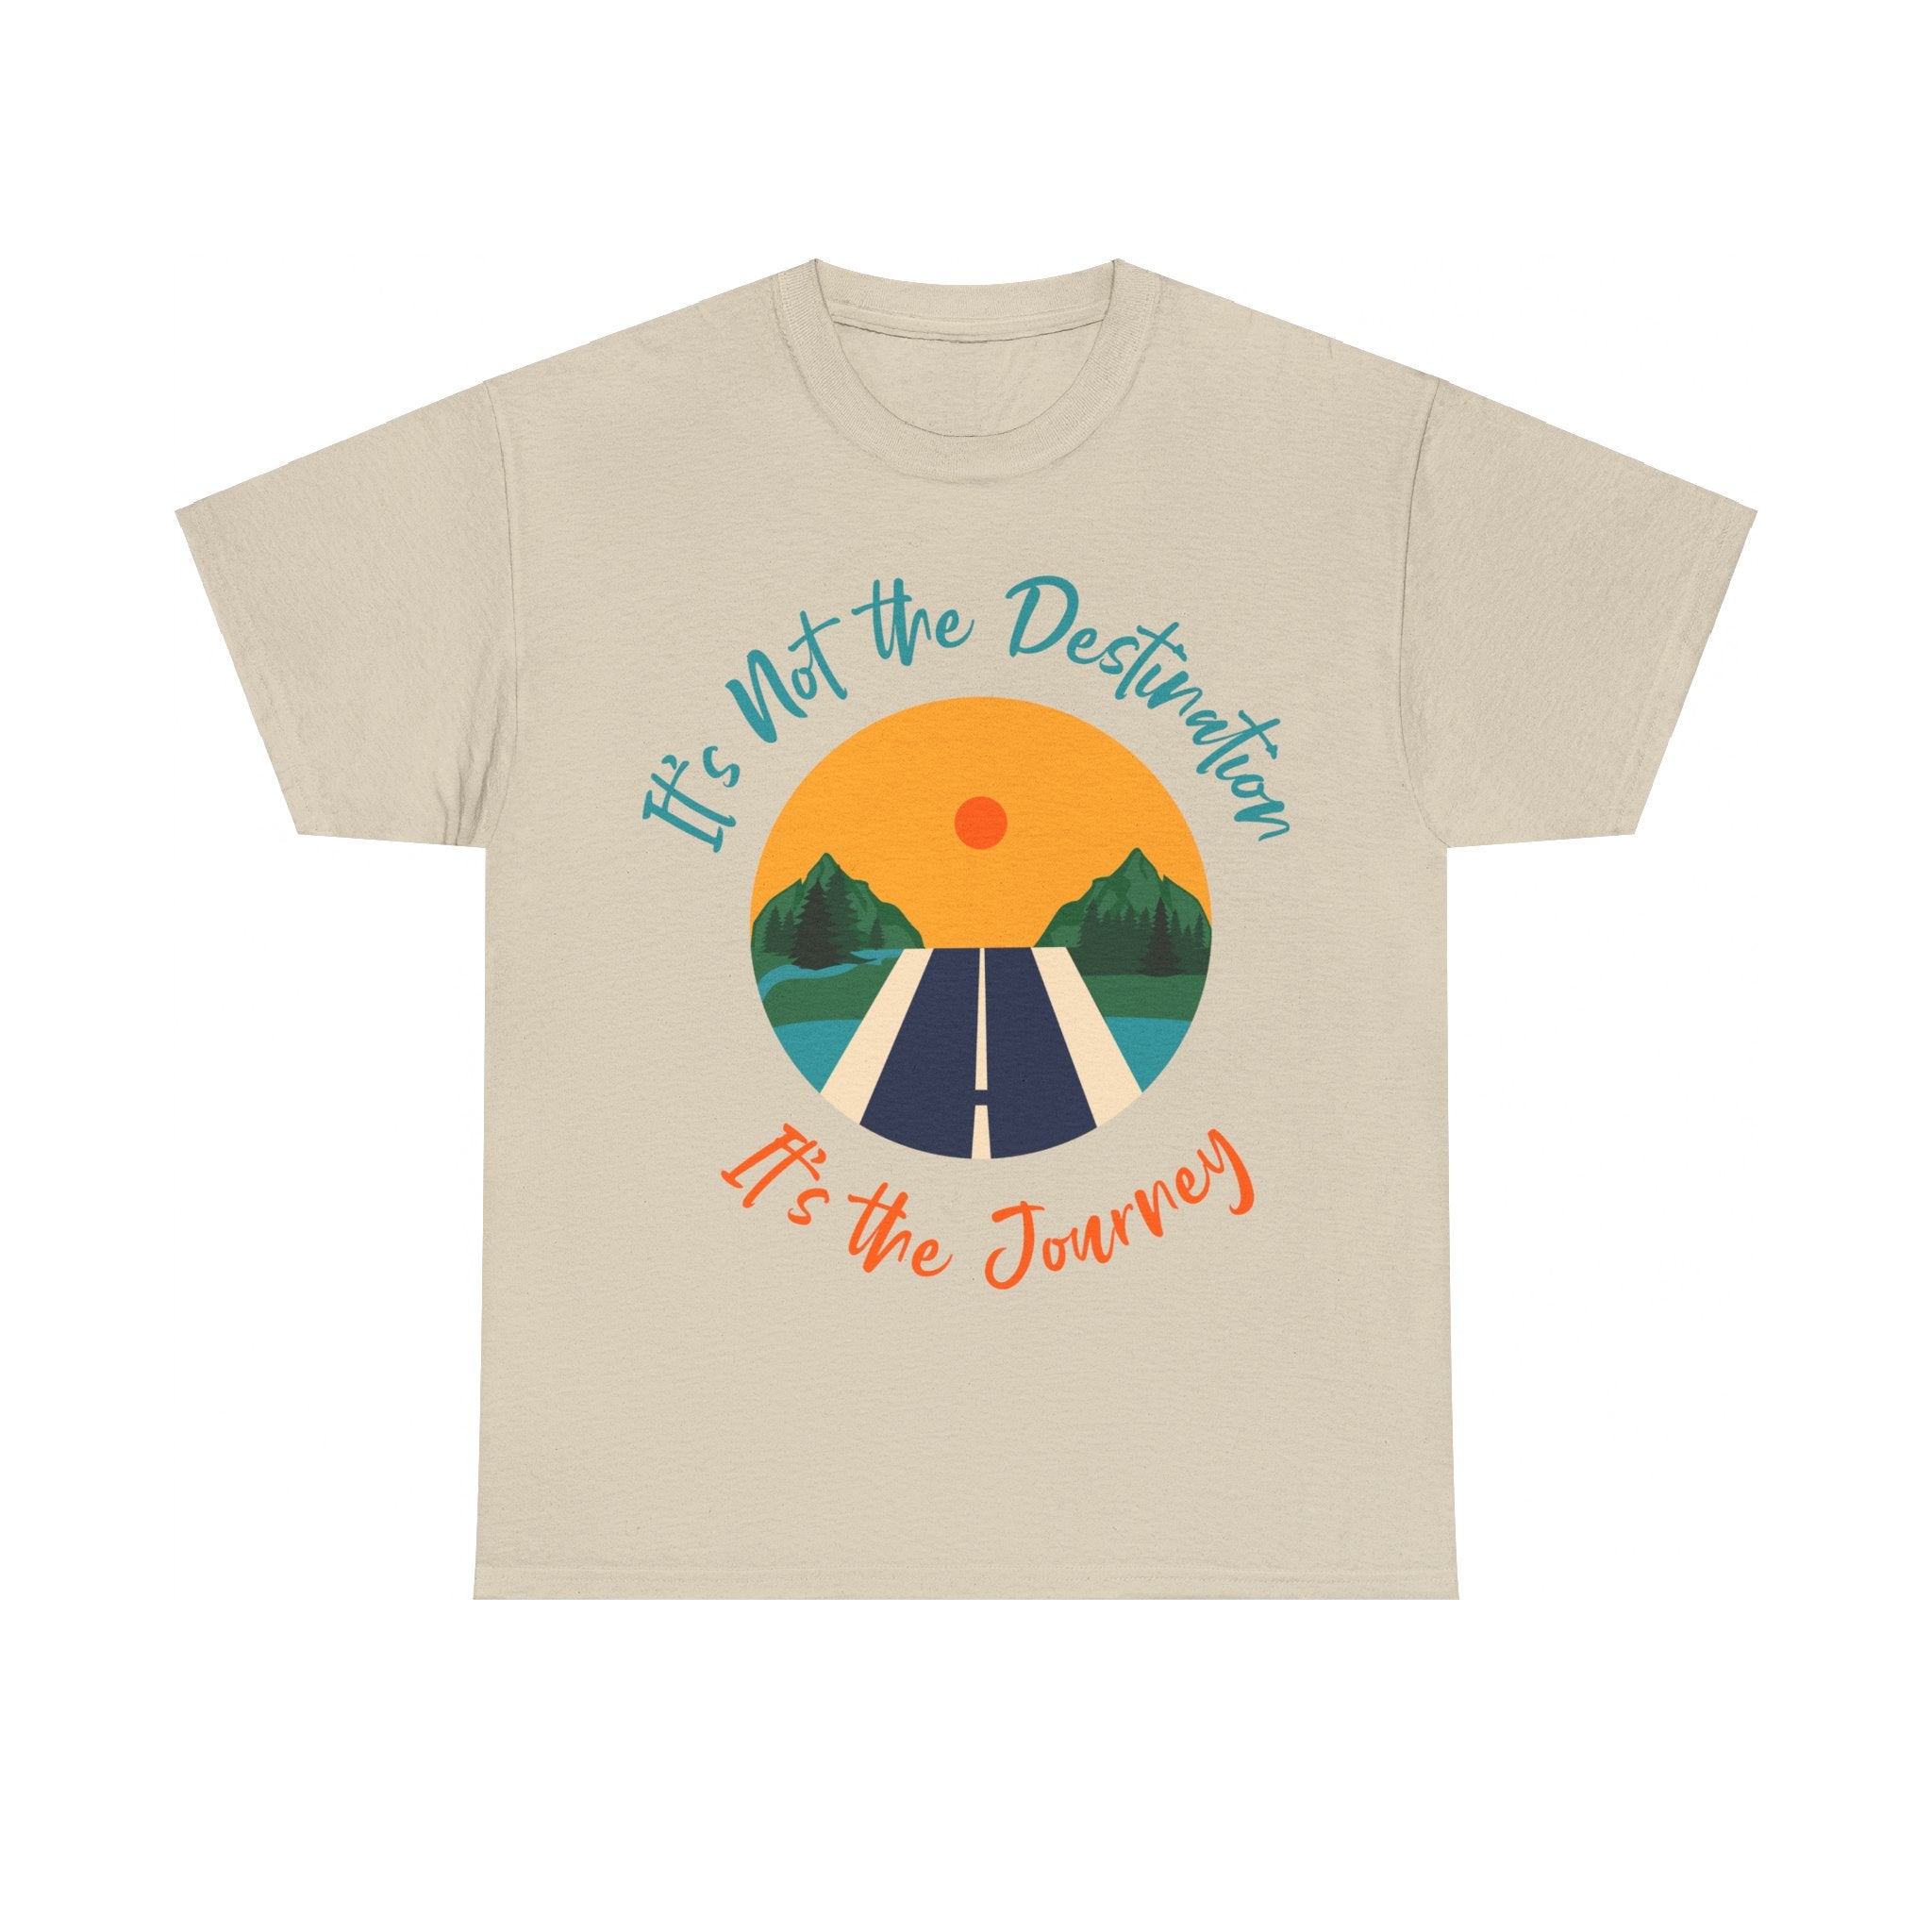 “It’s Not the Destination, It’s the Journey” Scenic Road Trip T-Shirt - TreesRus2 Clothing